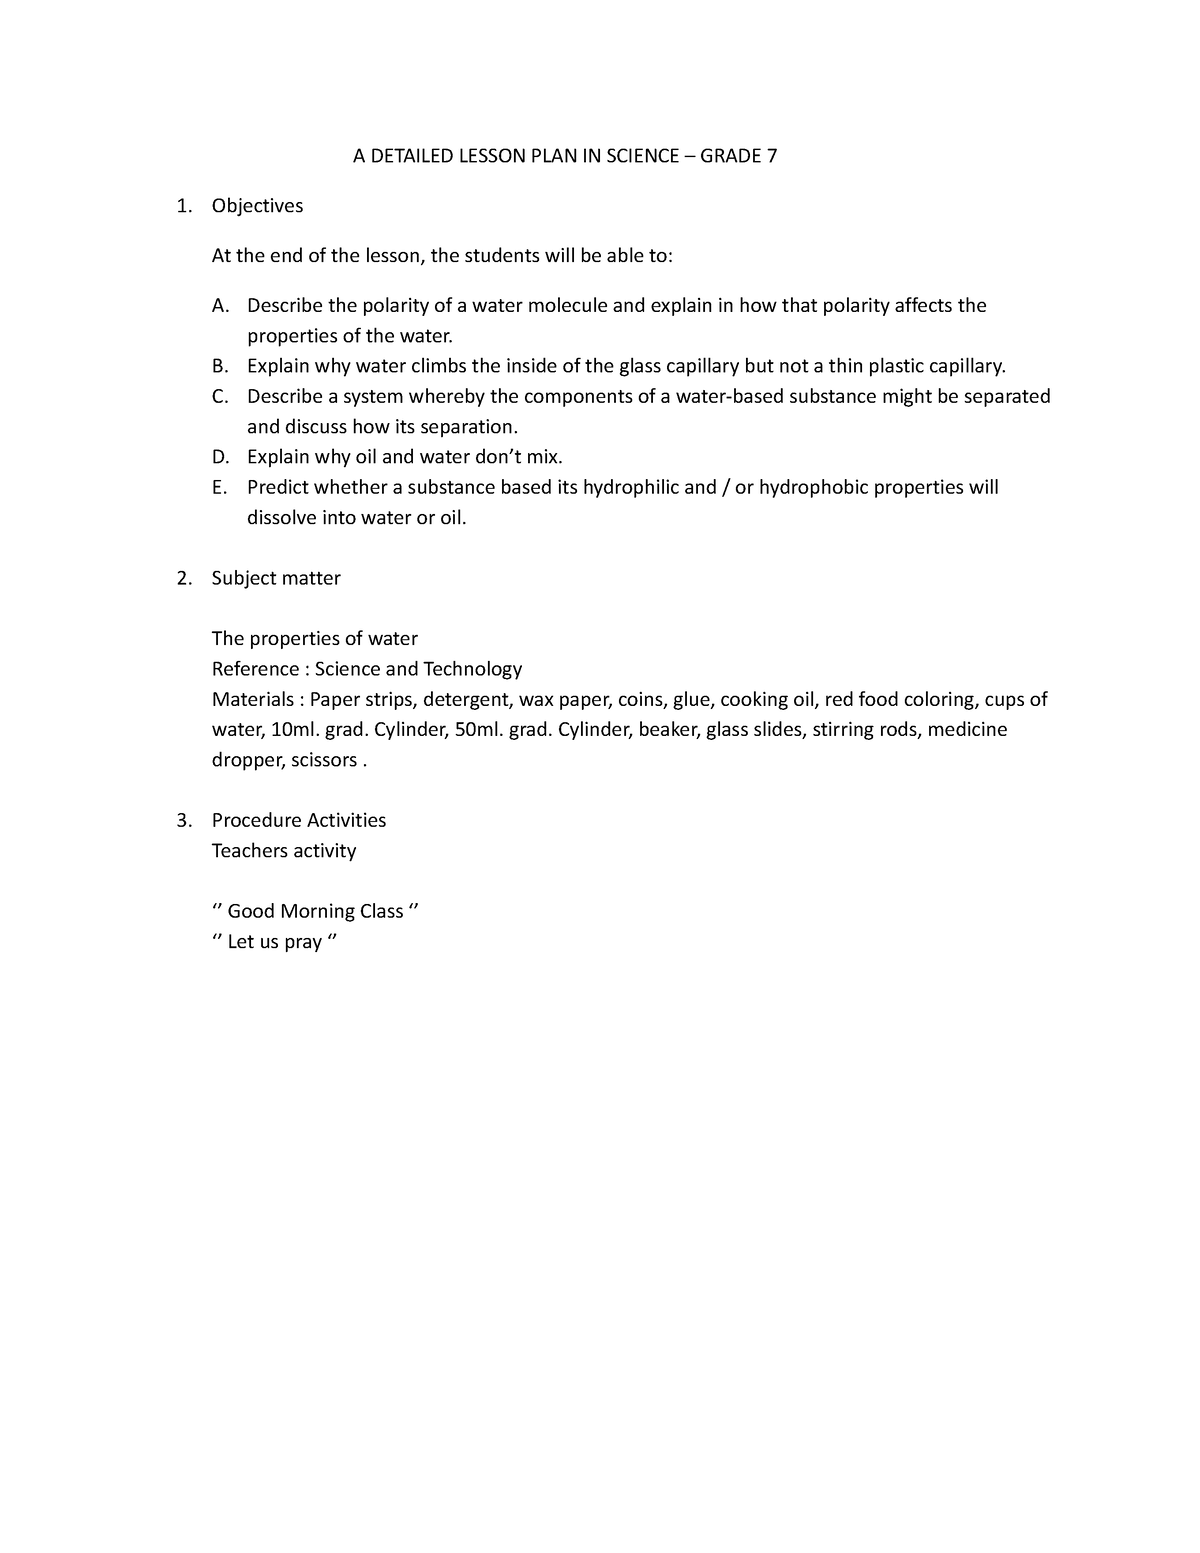 A Detailed Lesson PLAN IN Science - A DETAILED LESSON PLAN IN SCIENCE ...